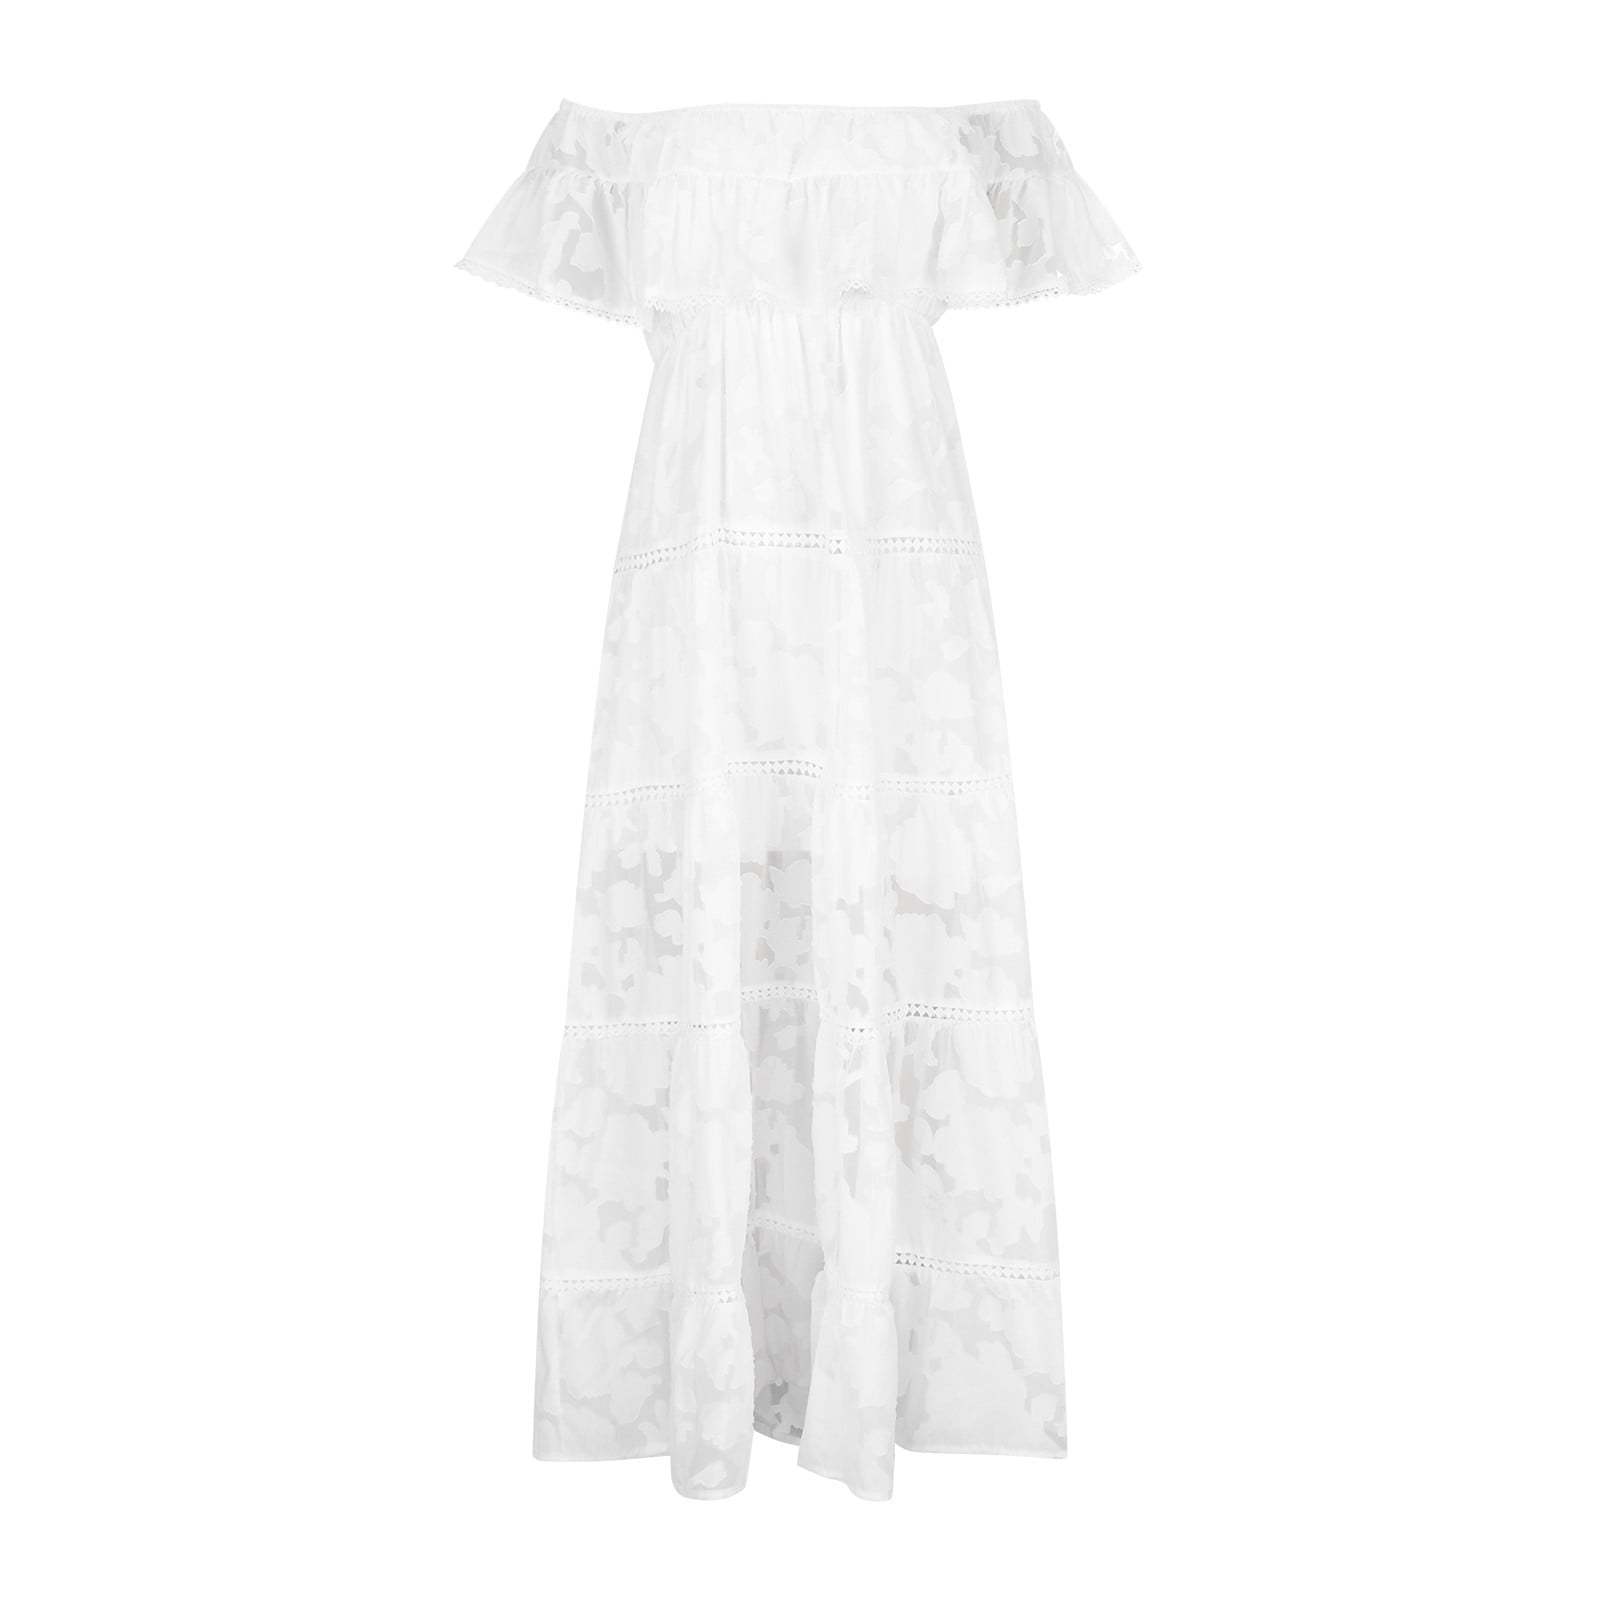 Zpanxa White Maxi Dress for Women, Plus Size Bohemian Casual Dress, Casual  Short Sleeve Off-The-Shoulder Long Dress, Solid Ankle-Length Dress, White  Wedding Guest Dresses White XL